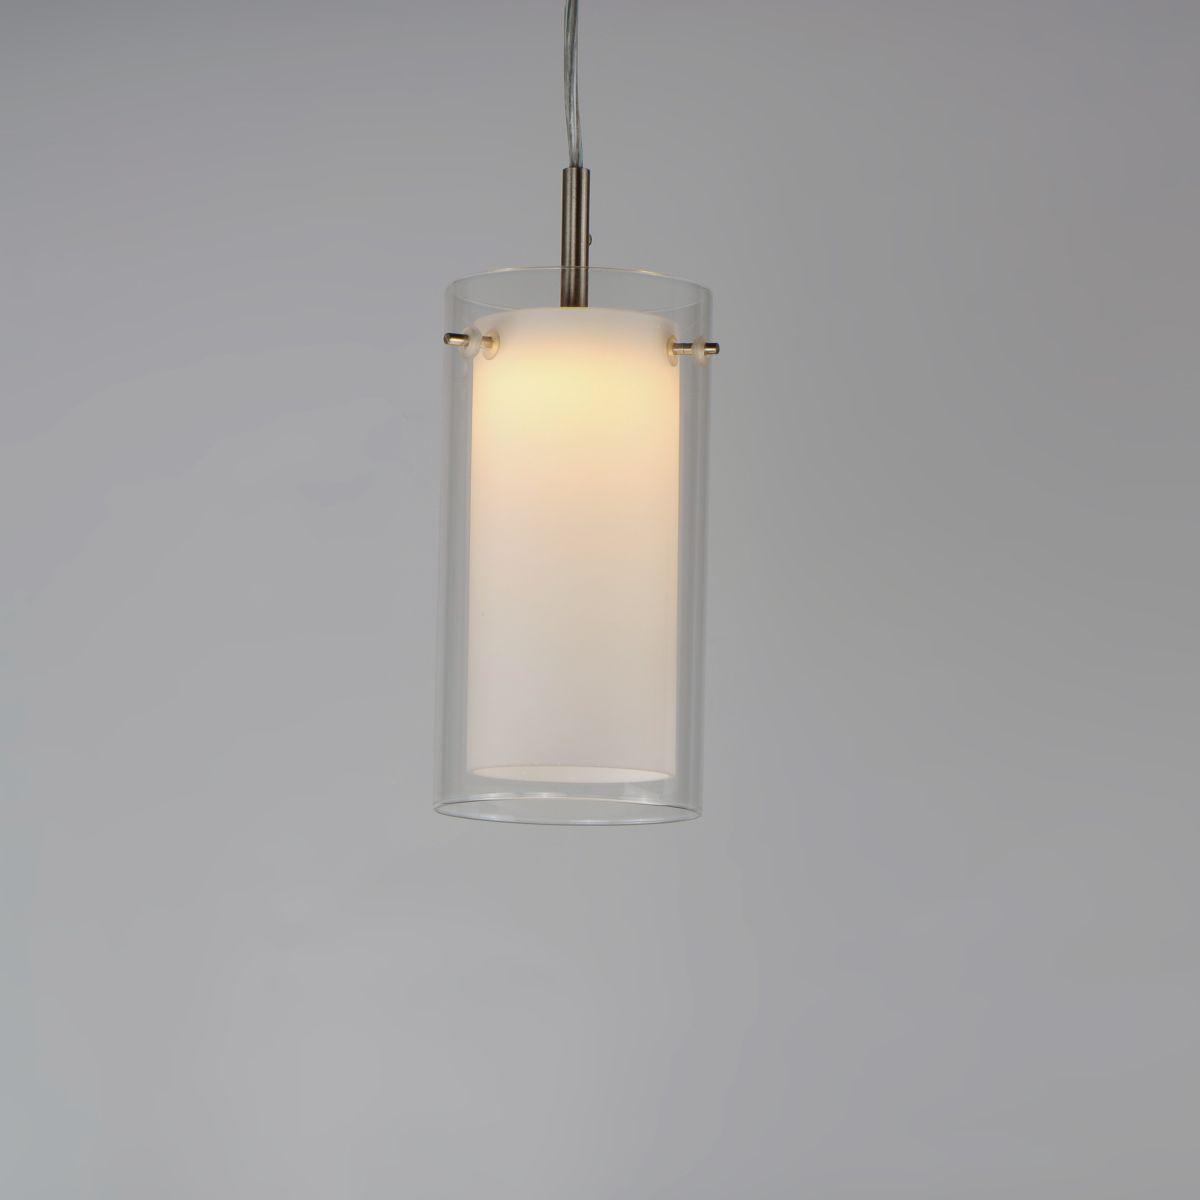 Duo 5 in. LED Pendant Light